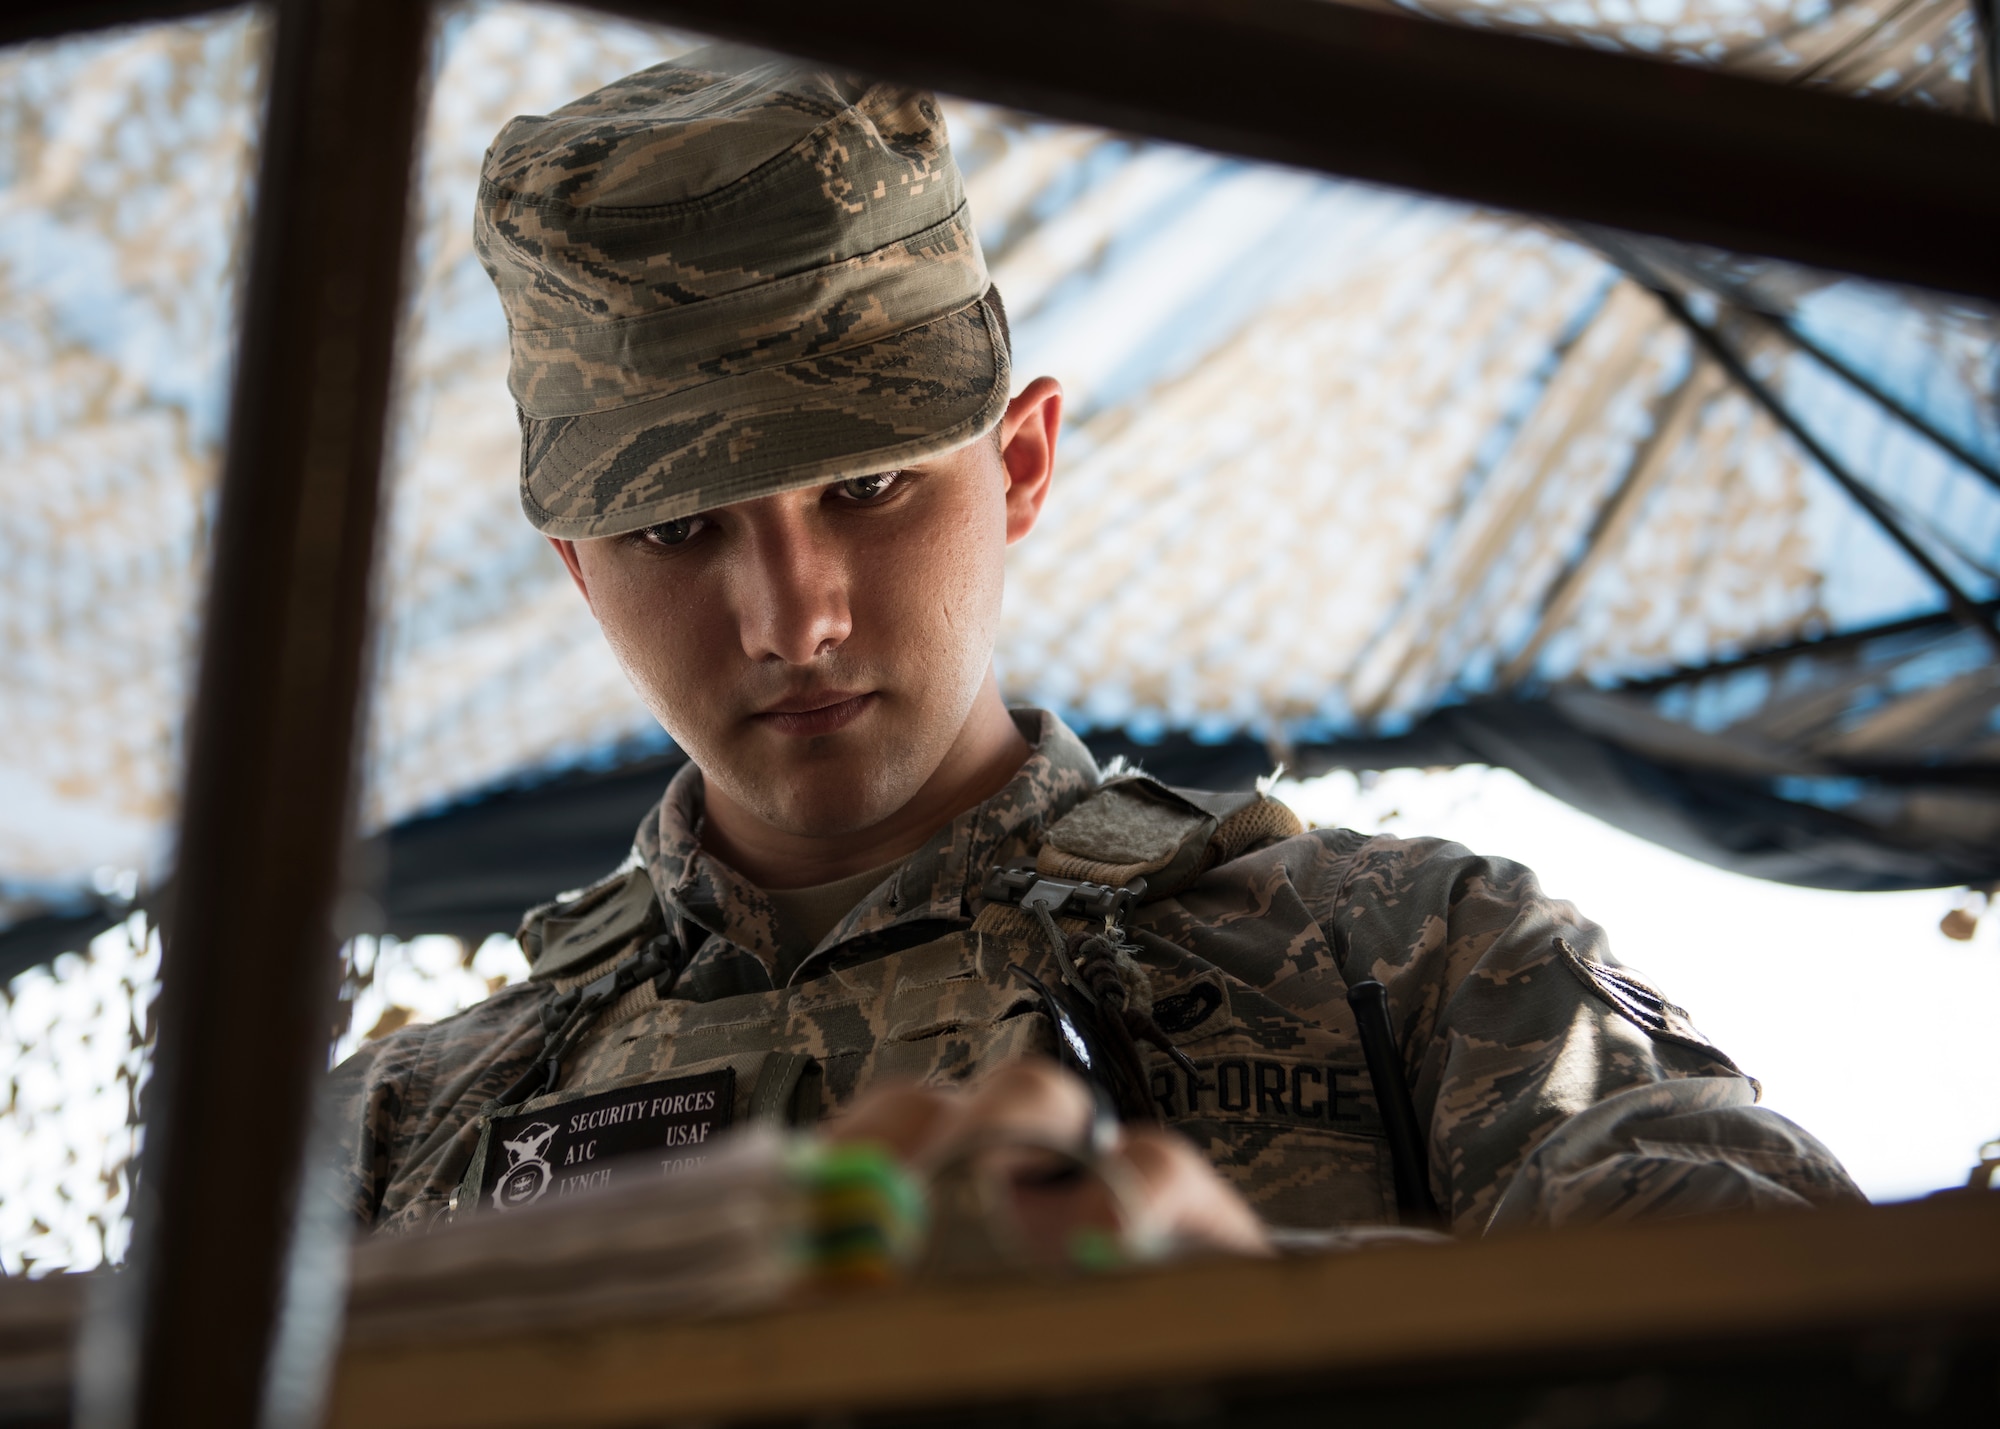 U.S. Air Force Airman 1st Class Tory Lynch, 39th Security Forces Squadron, inspects ID cards at Incirlik Air Base, Turkey, June 21, 2018.